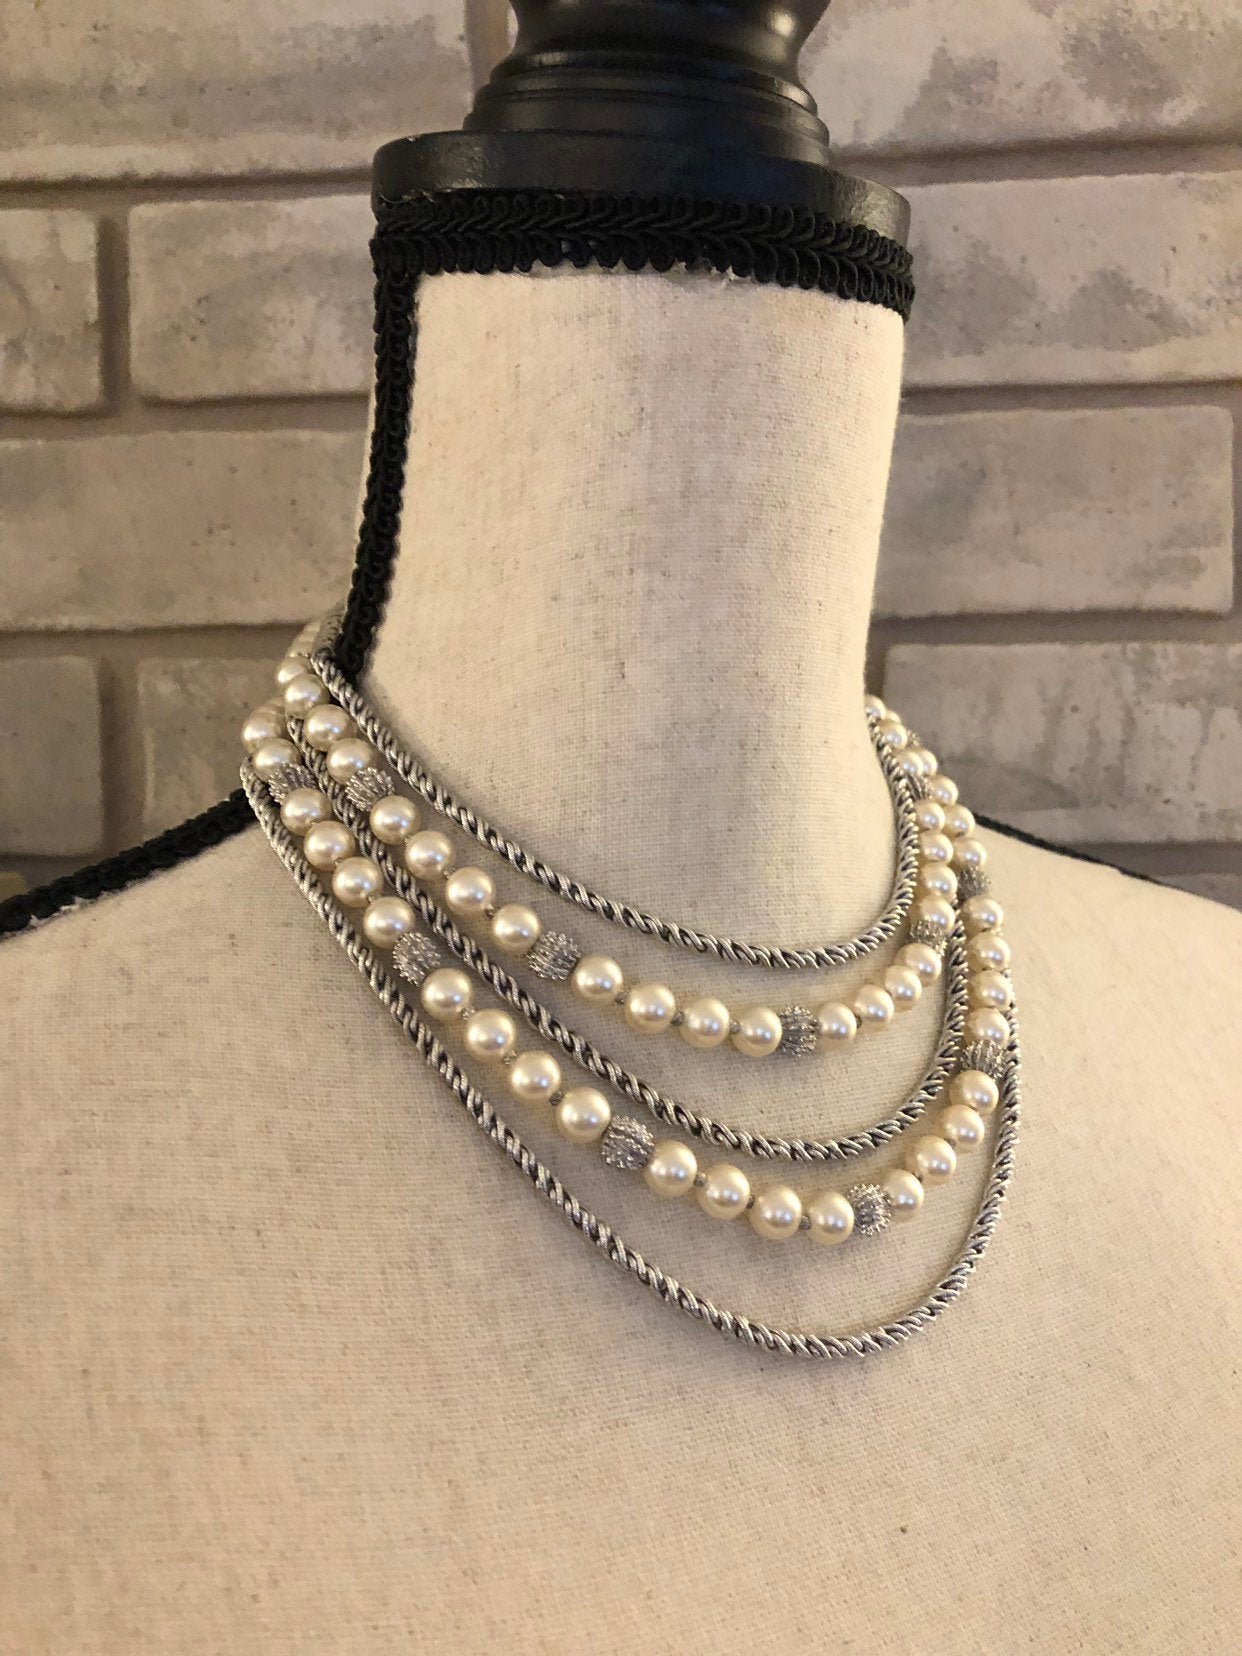 1980s Faux Pearl Multi-strand Necklace - Etsy